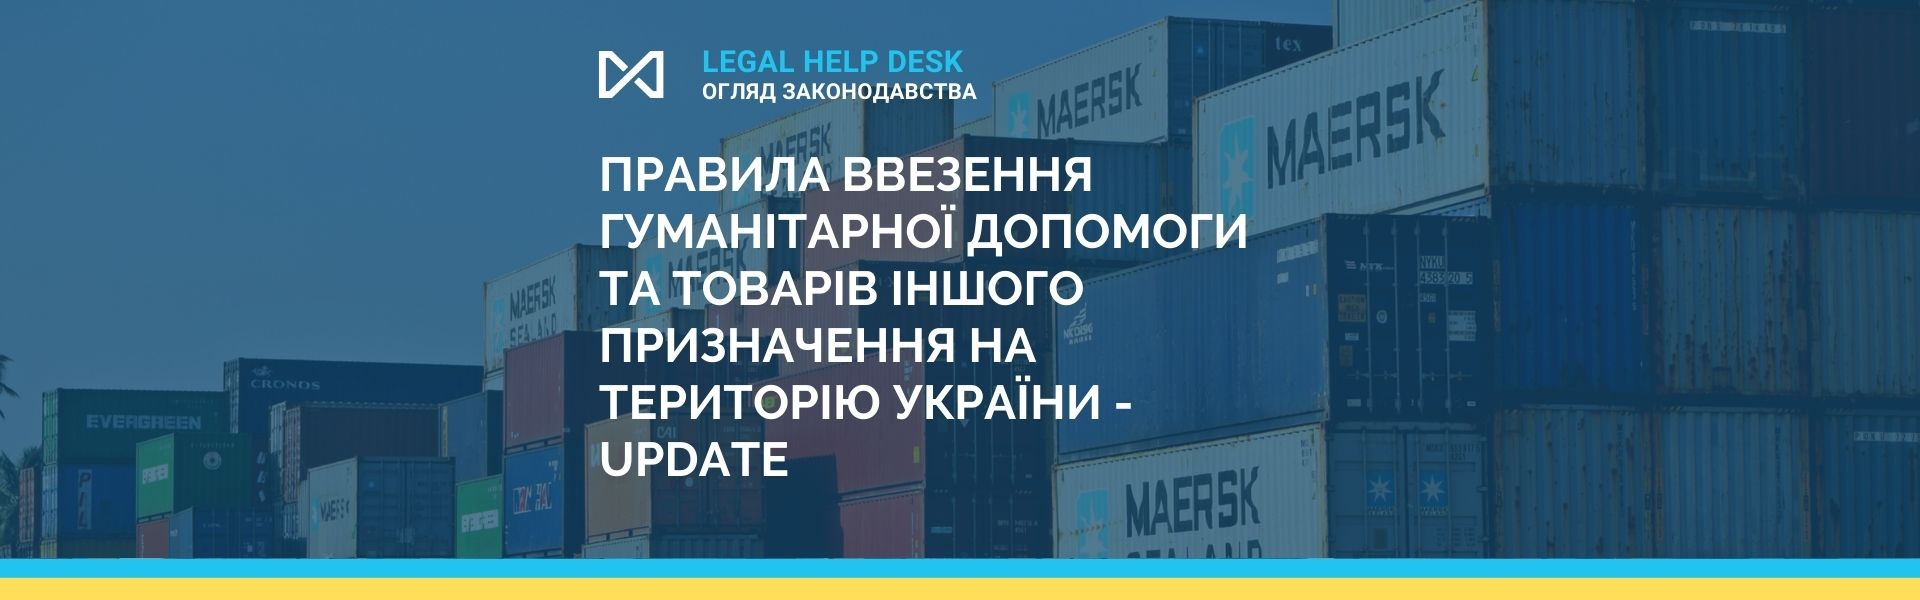 Rules for importing humanitarian aid and other goods in Ukraine - UPDATE